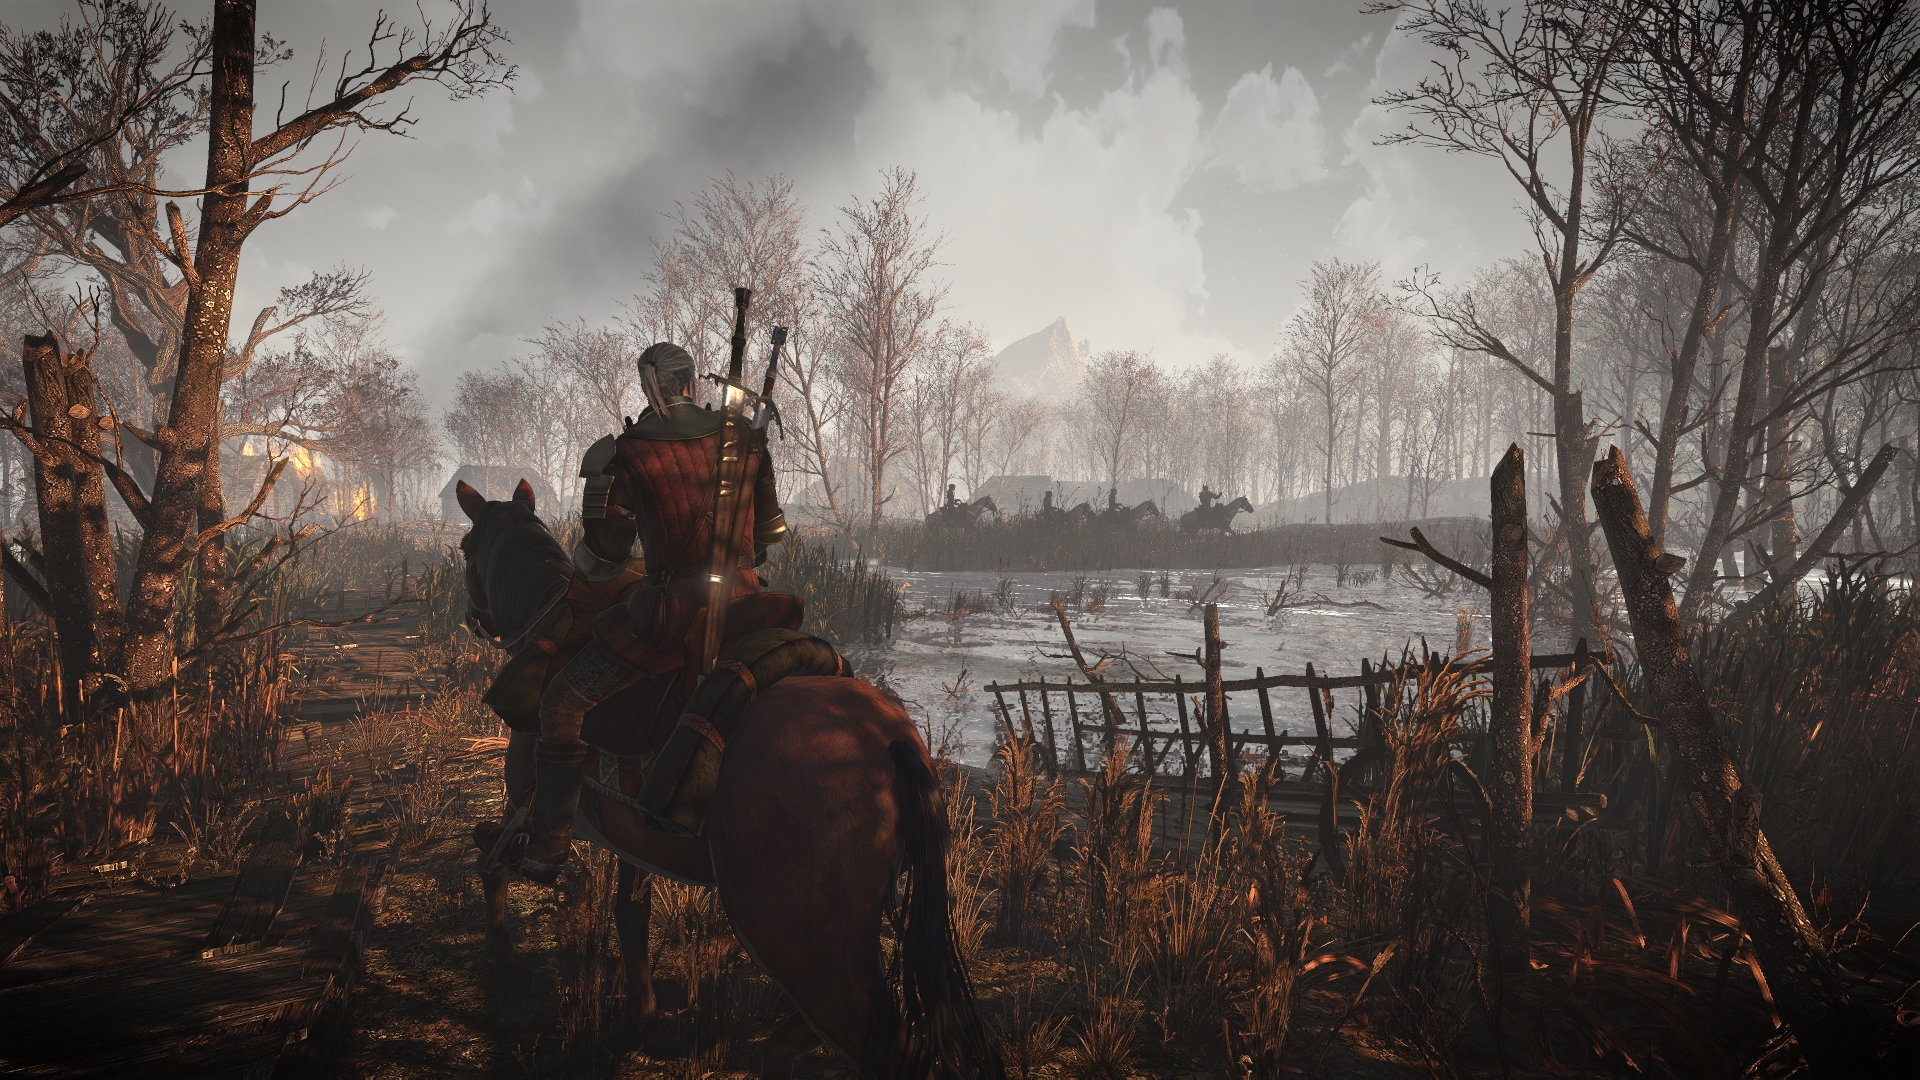 game the witcher 3